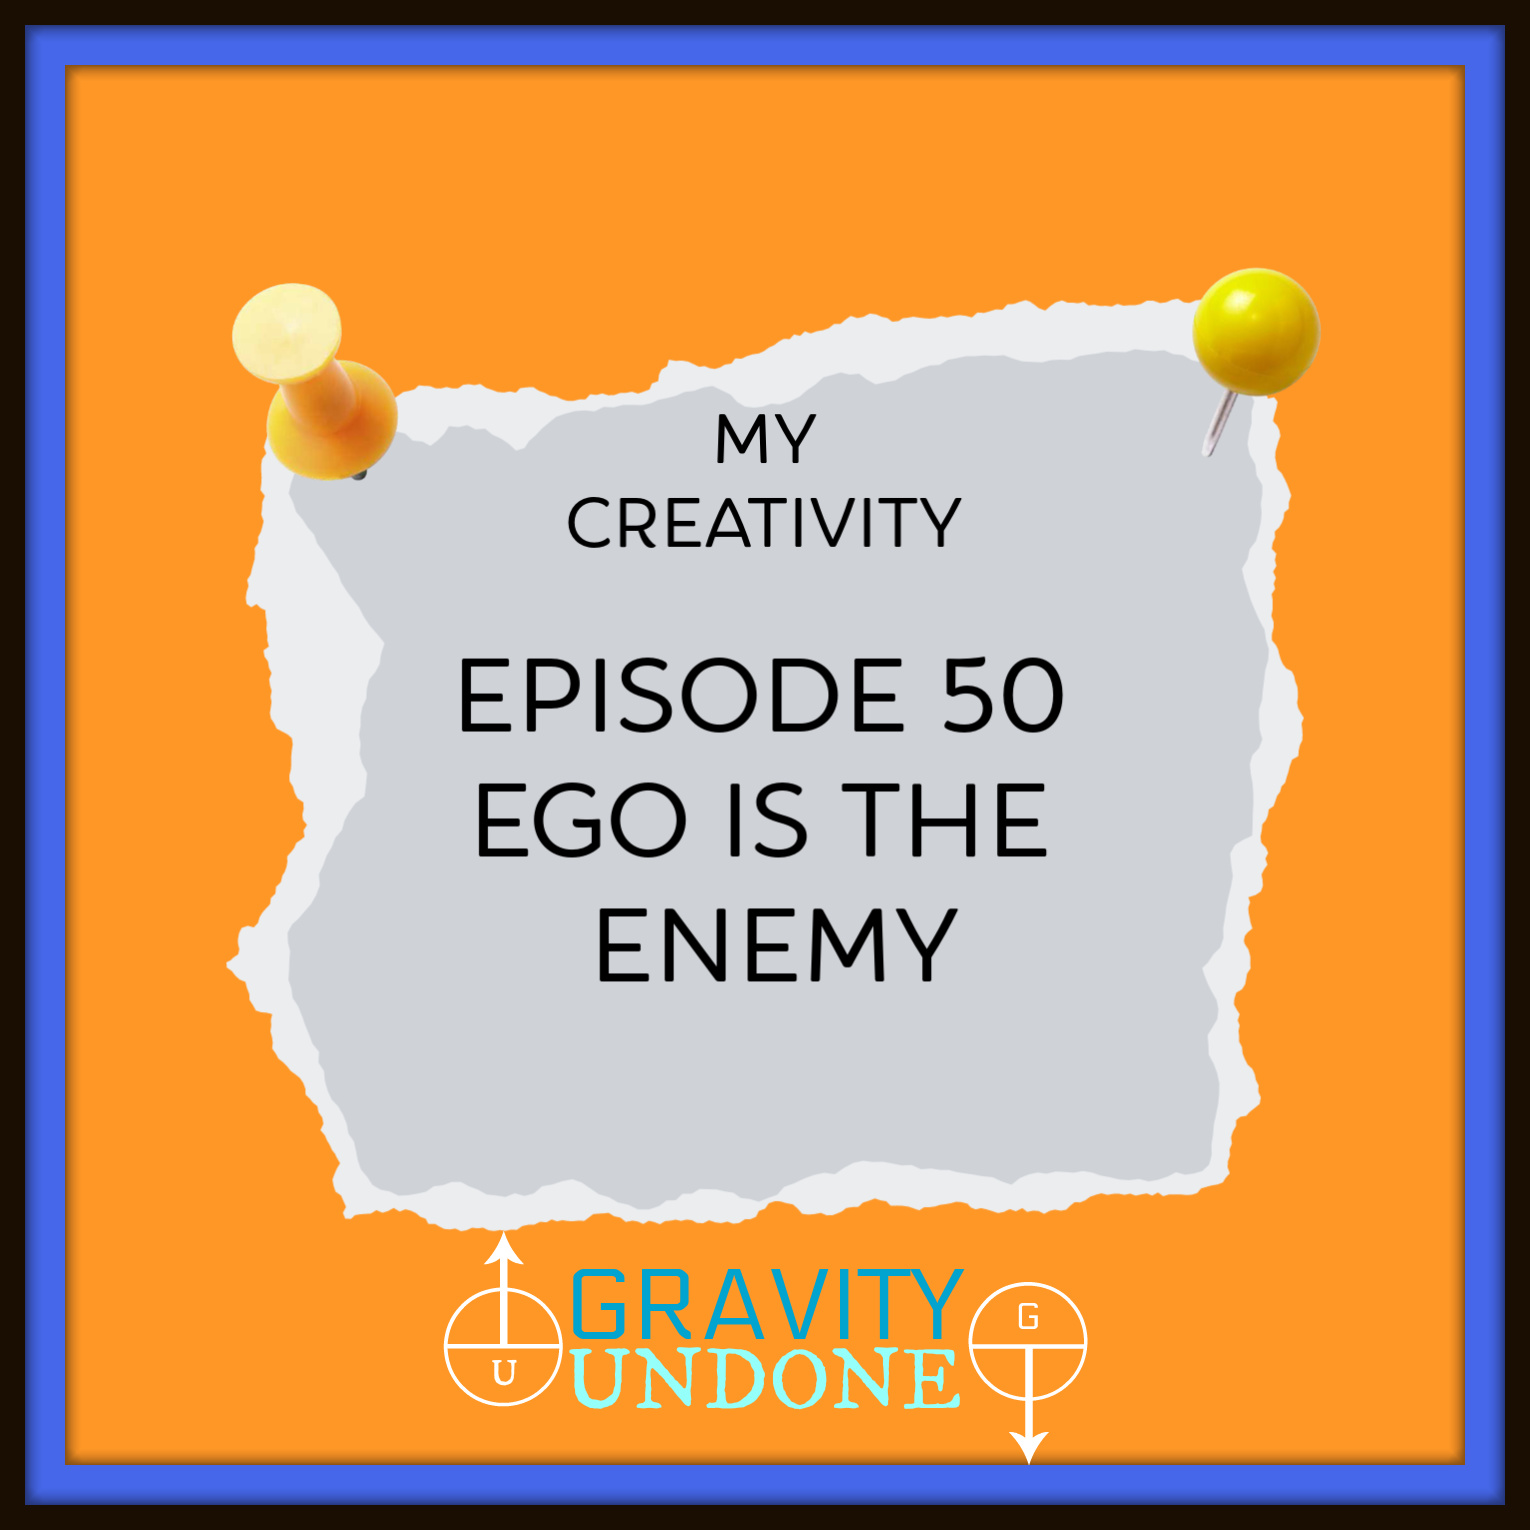 Episode 50 Ego Is The Enemy